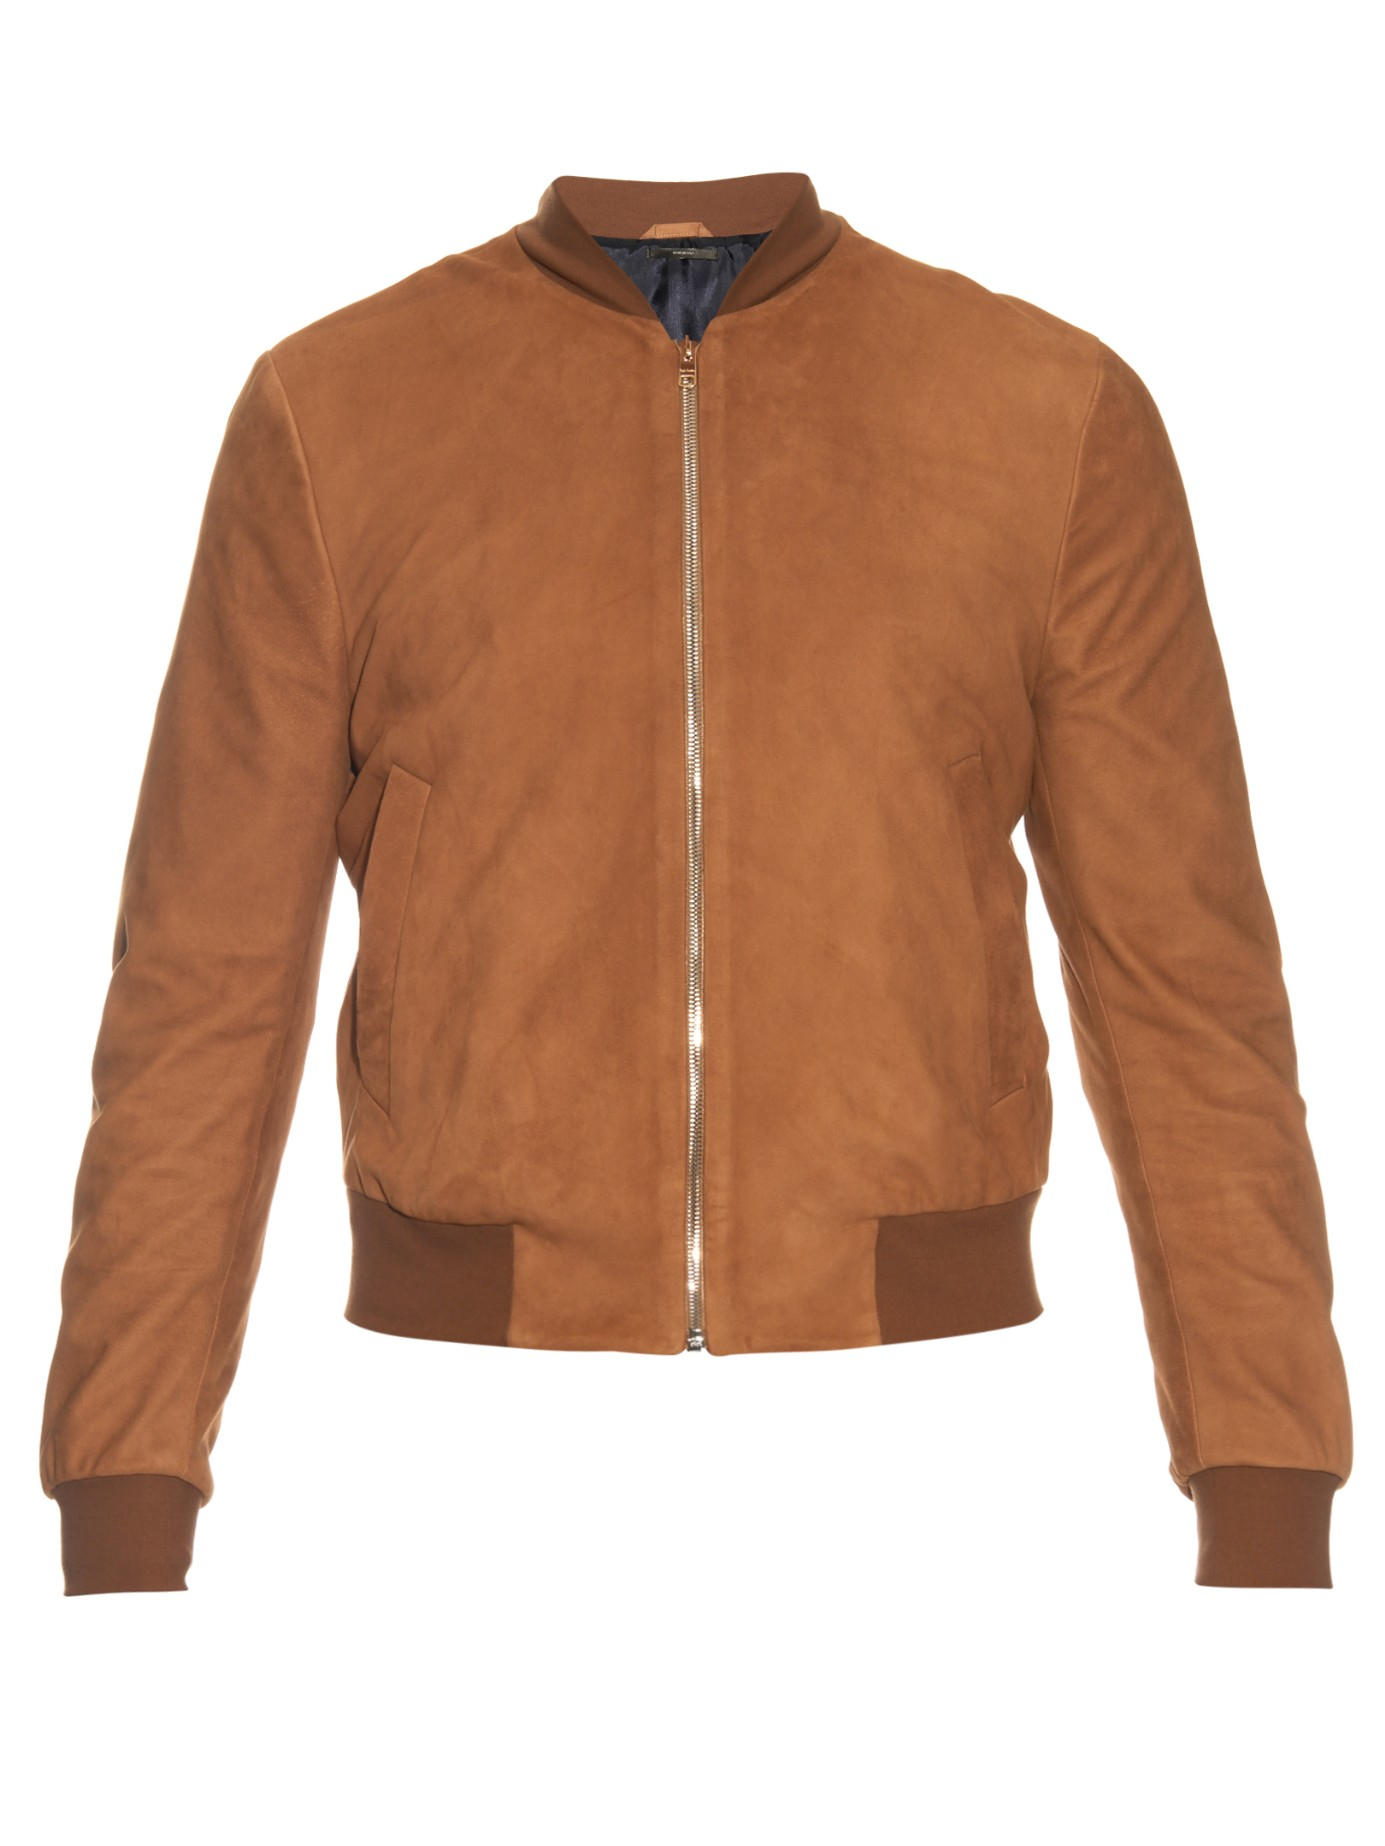 Paul Smith Suede Bomber Jacket in Brown for Men | Lyst Canada